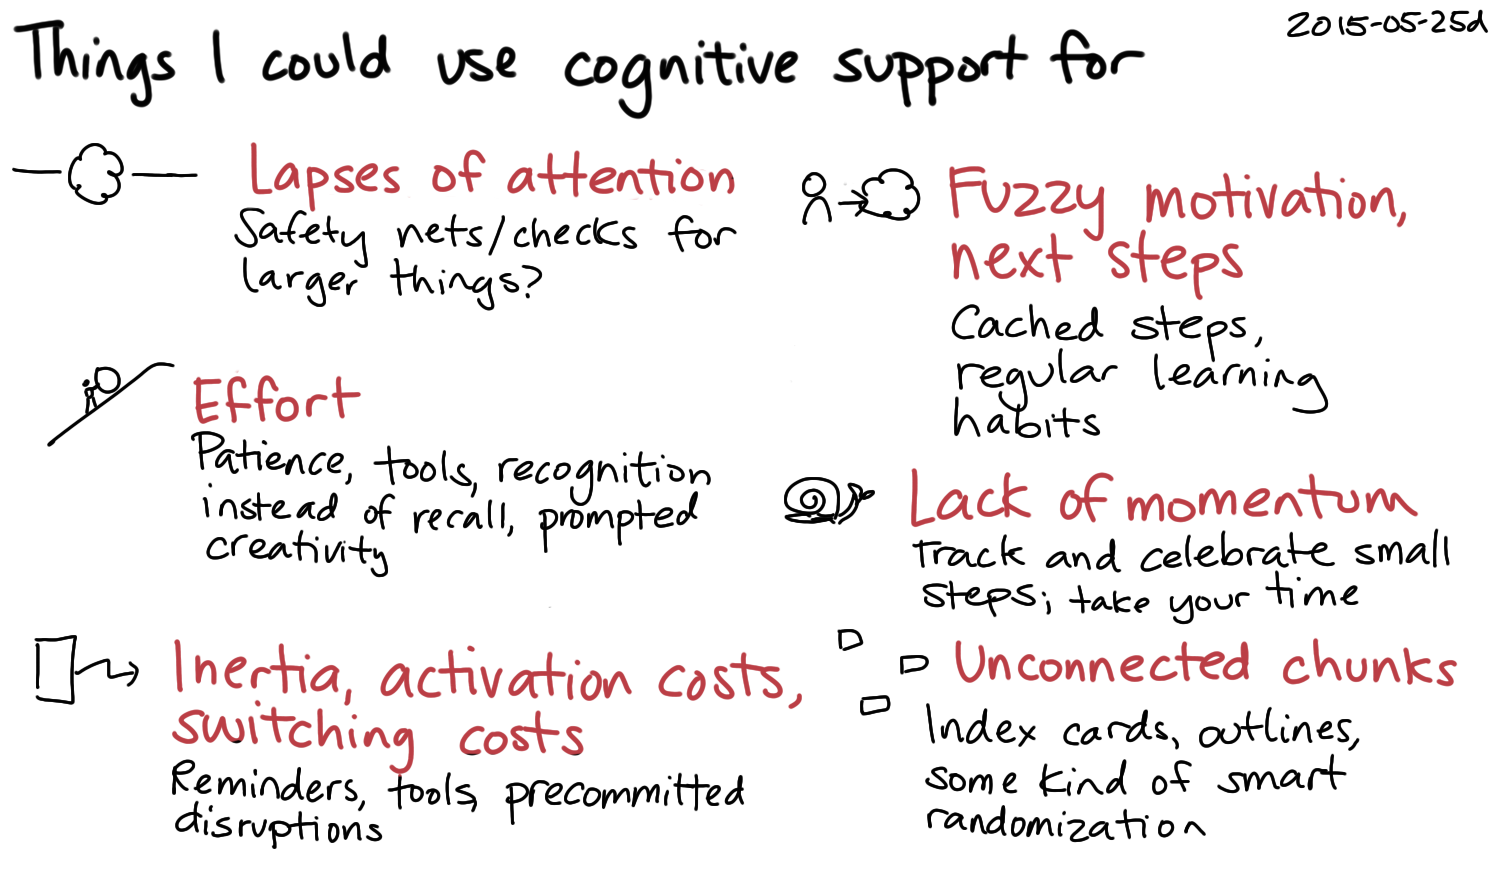 2015-05-25d Things I could use cognitive support for -- index card #fuzzy.png